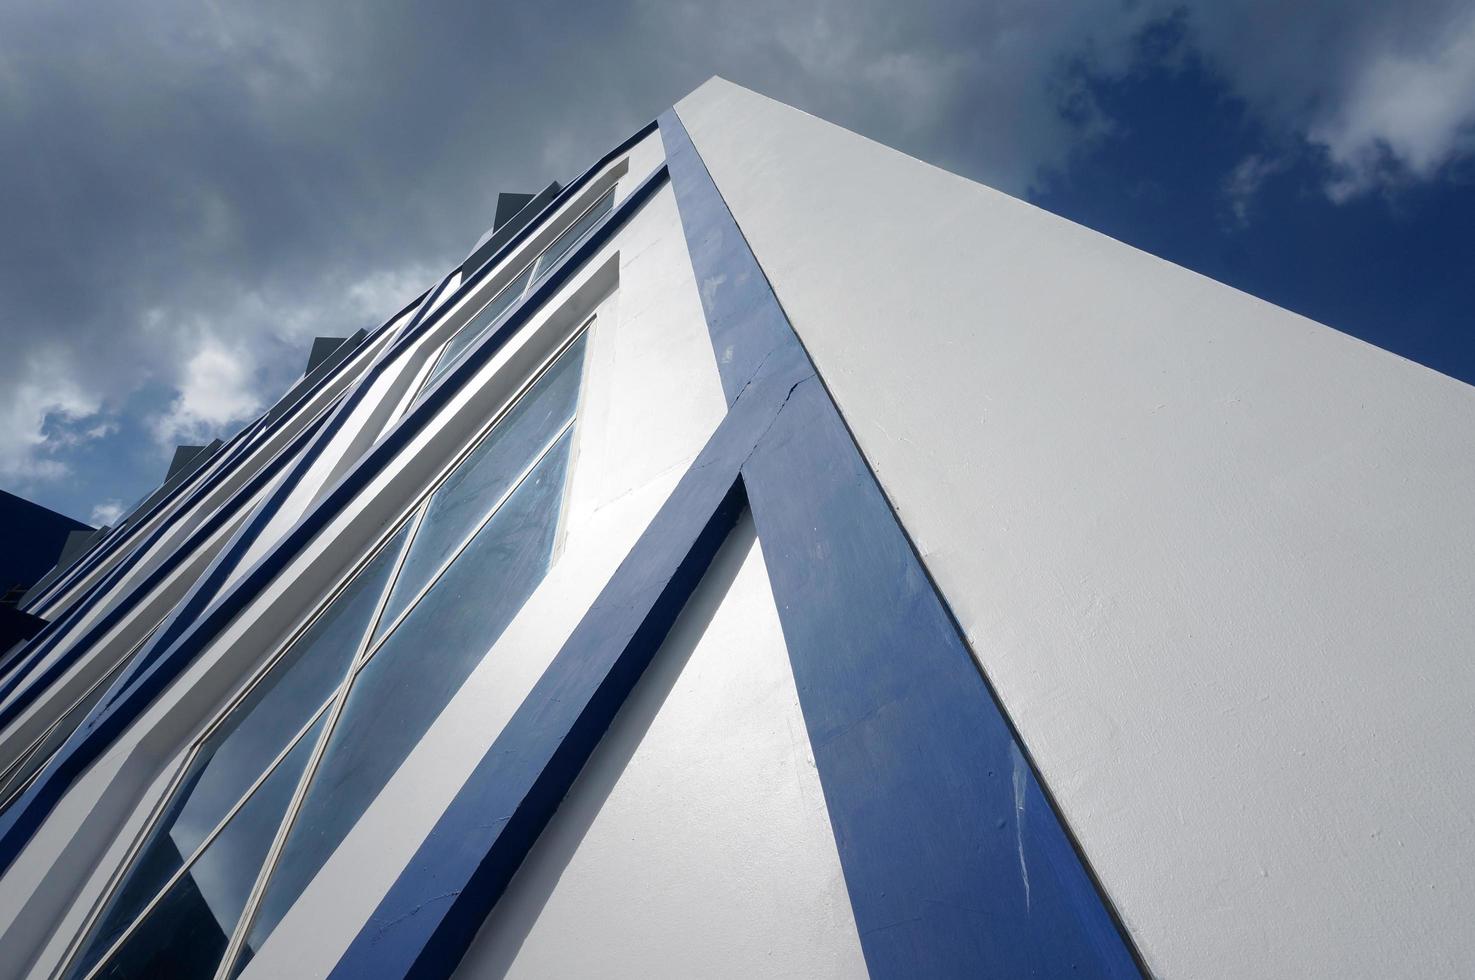 Sangatta, East Kutai, East Kalimantan, Indonesia, 2022 - Blue and white modern architecture with Pentagon glass windows. Blue sky and cloud reflection. photo